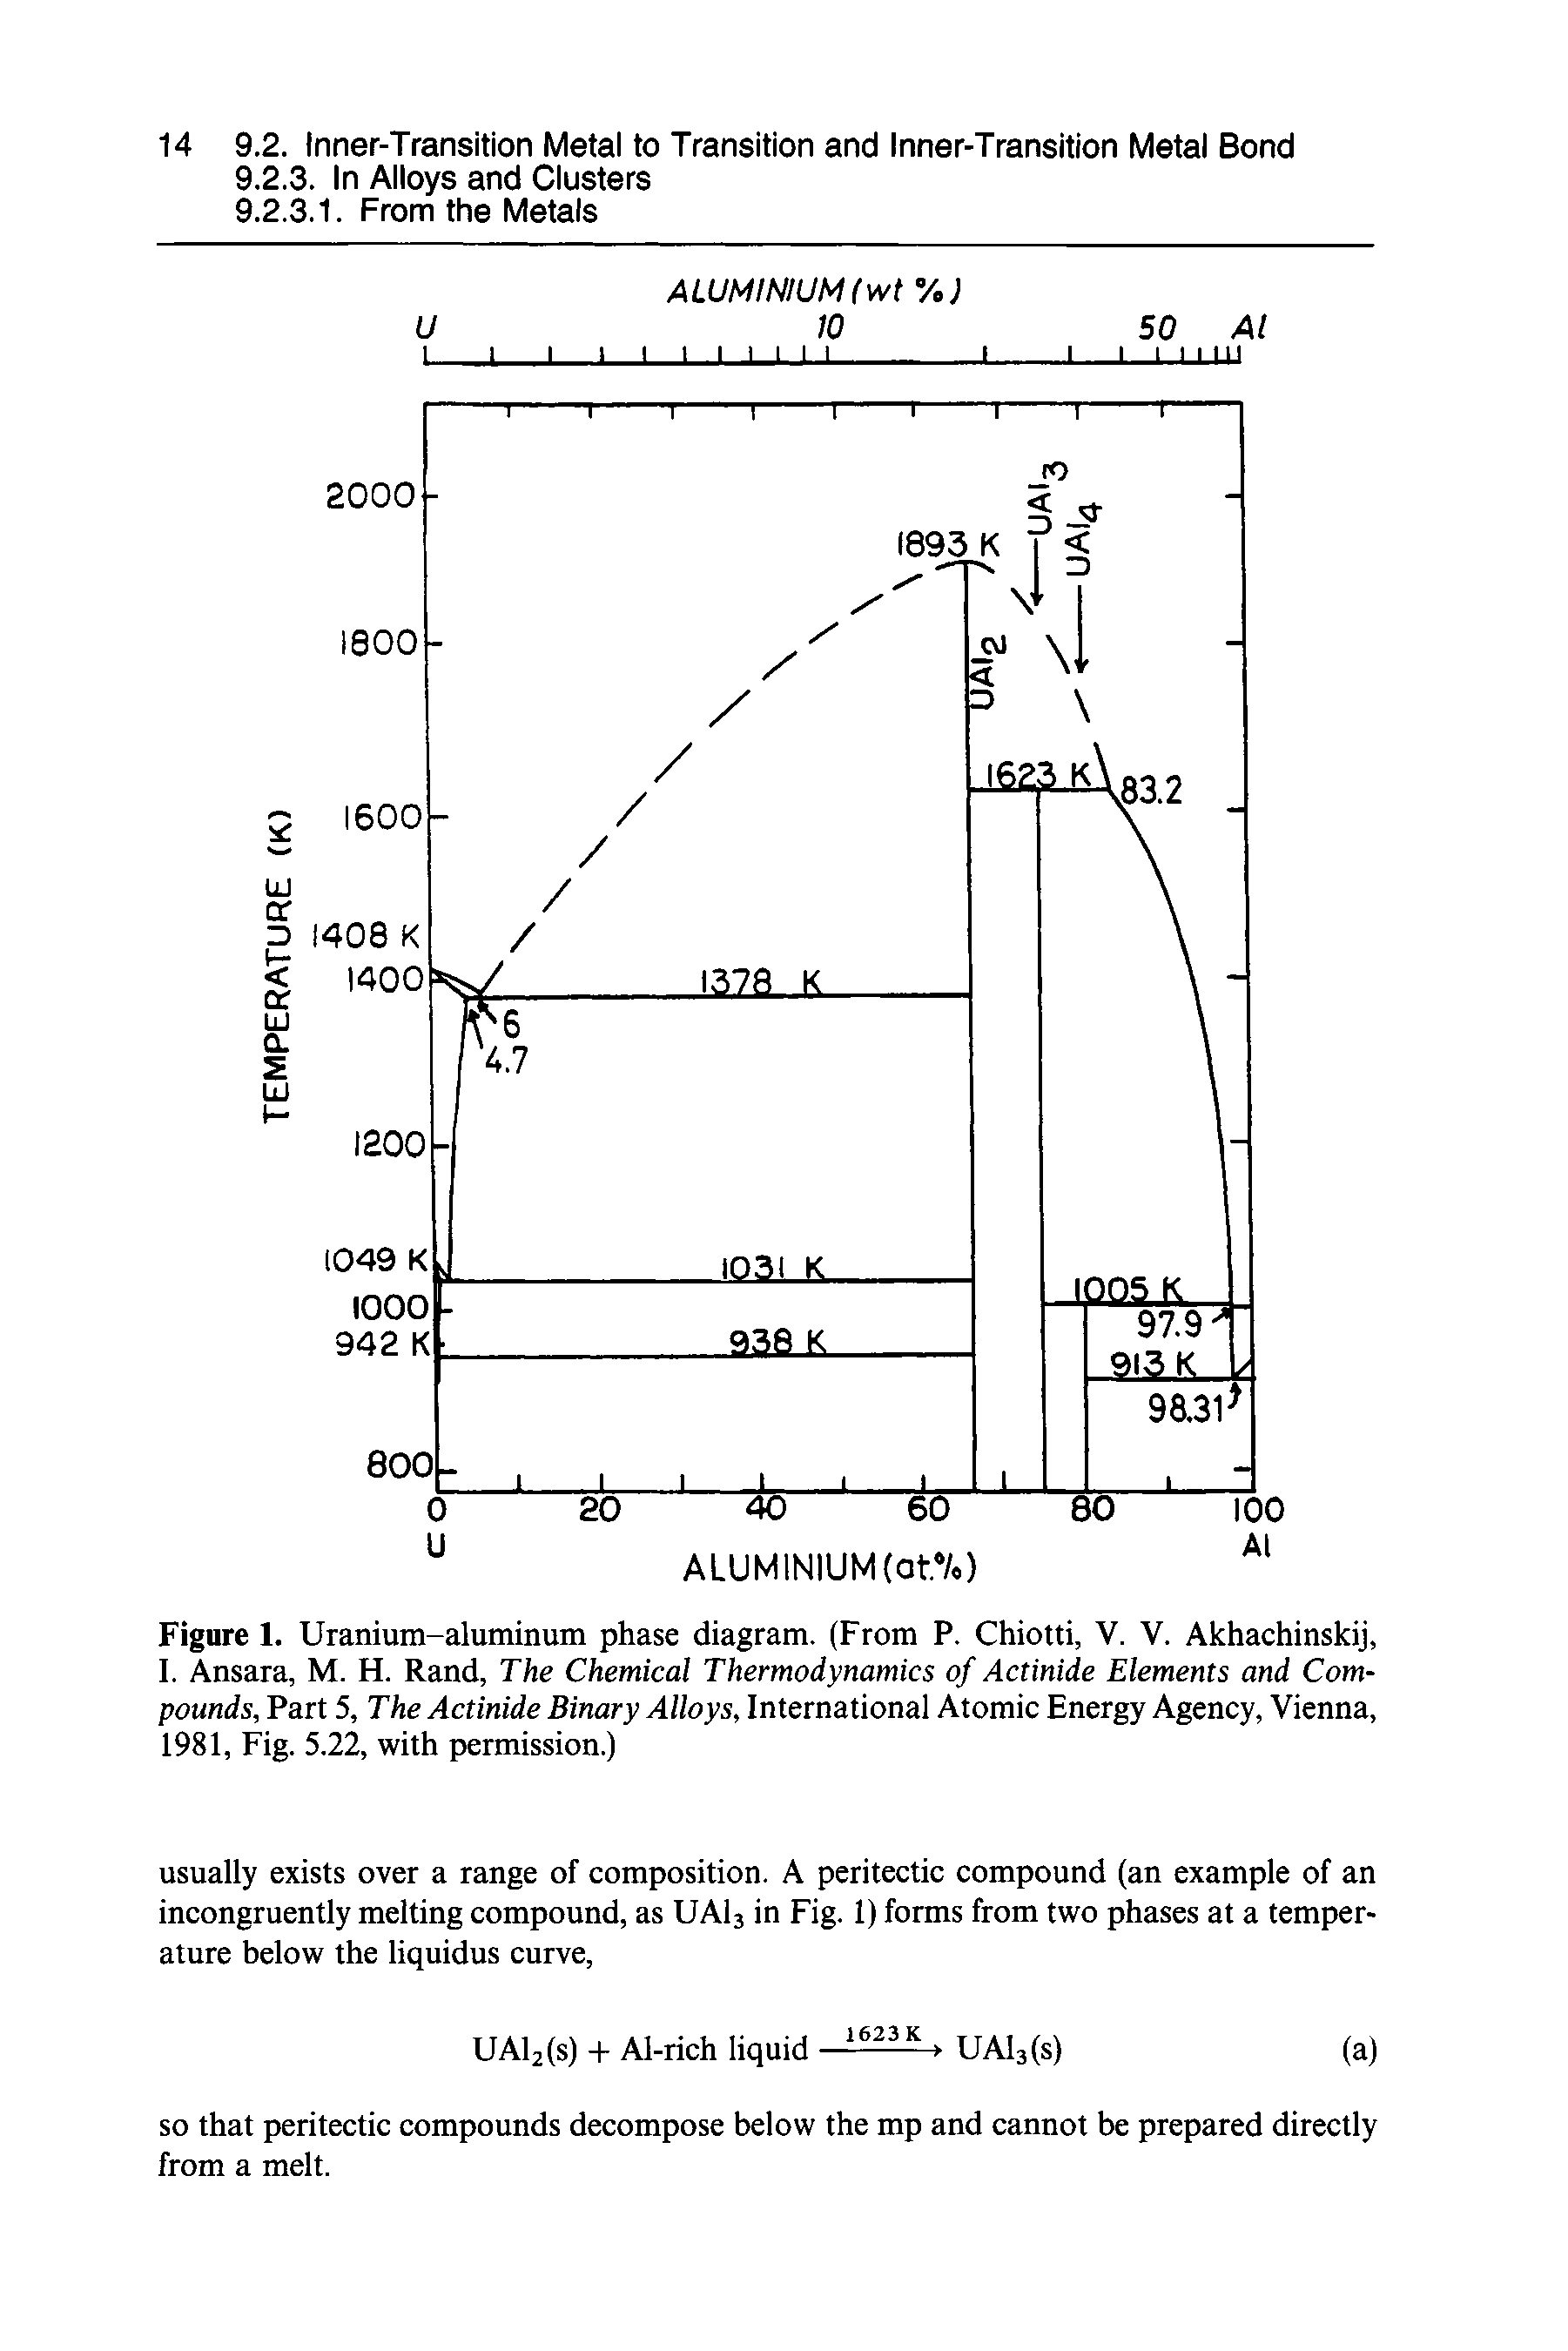 Figure 1. Uranium-aluminum phase diagram. (From P. Chiotti, V. V. Akhachinskij, I. Ansara, M. H. Rand, The Chemical Thermodynamics of Actinide Elements and Compounds, Part 5, The Actinide Binary Alloys, International Atomic Energy Agency, Vienna, 1981, Fig. 5.22, with permission.)...